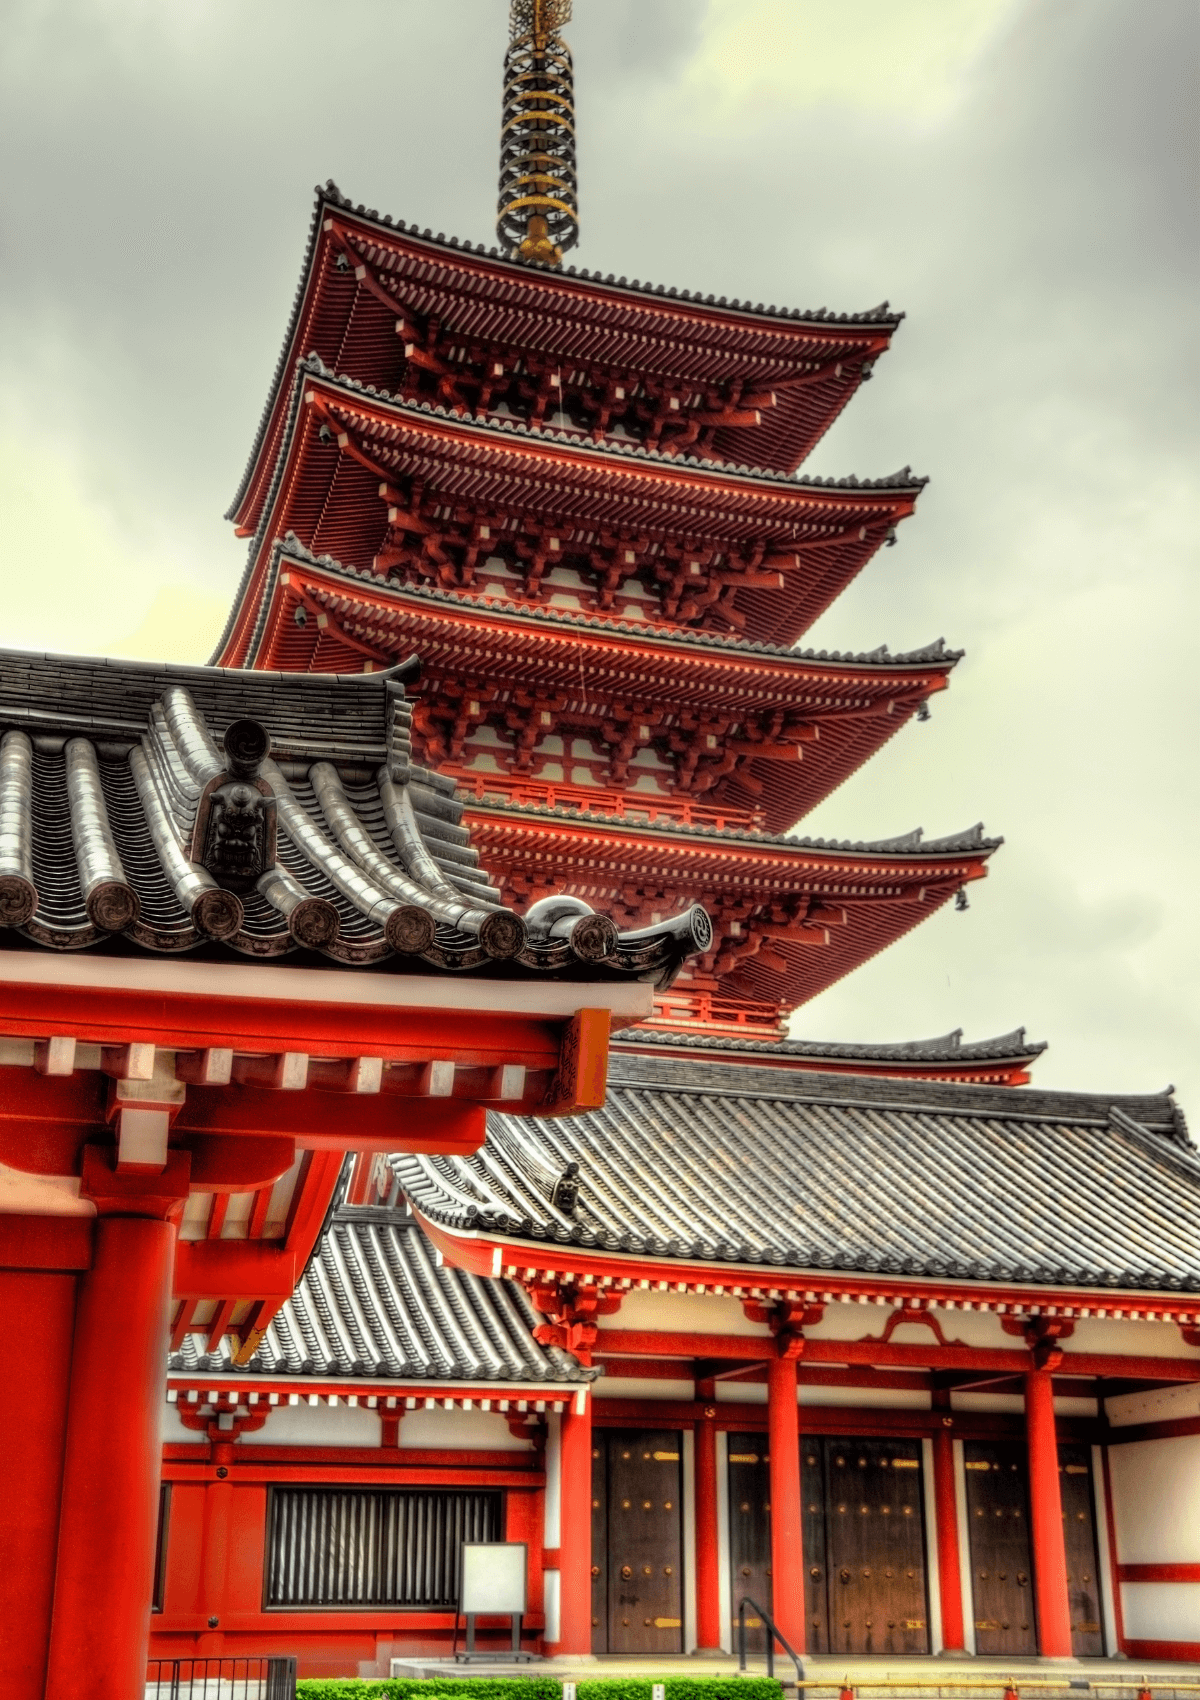 Senso-ji the oldest temple is a must-see on a 7-day Tokyo itinerary.